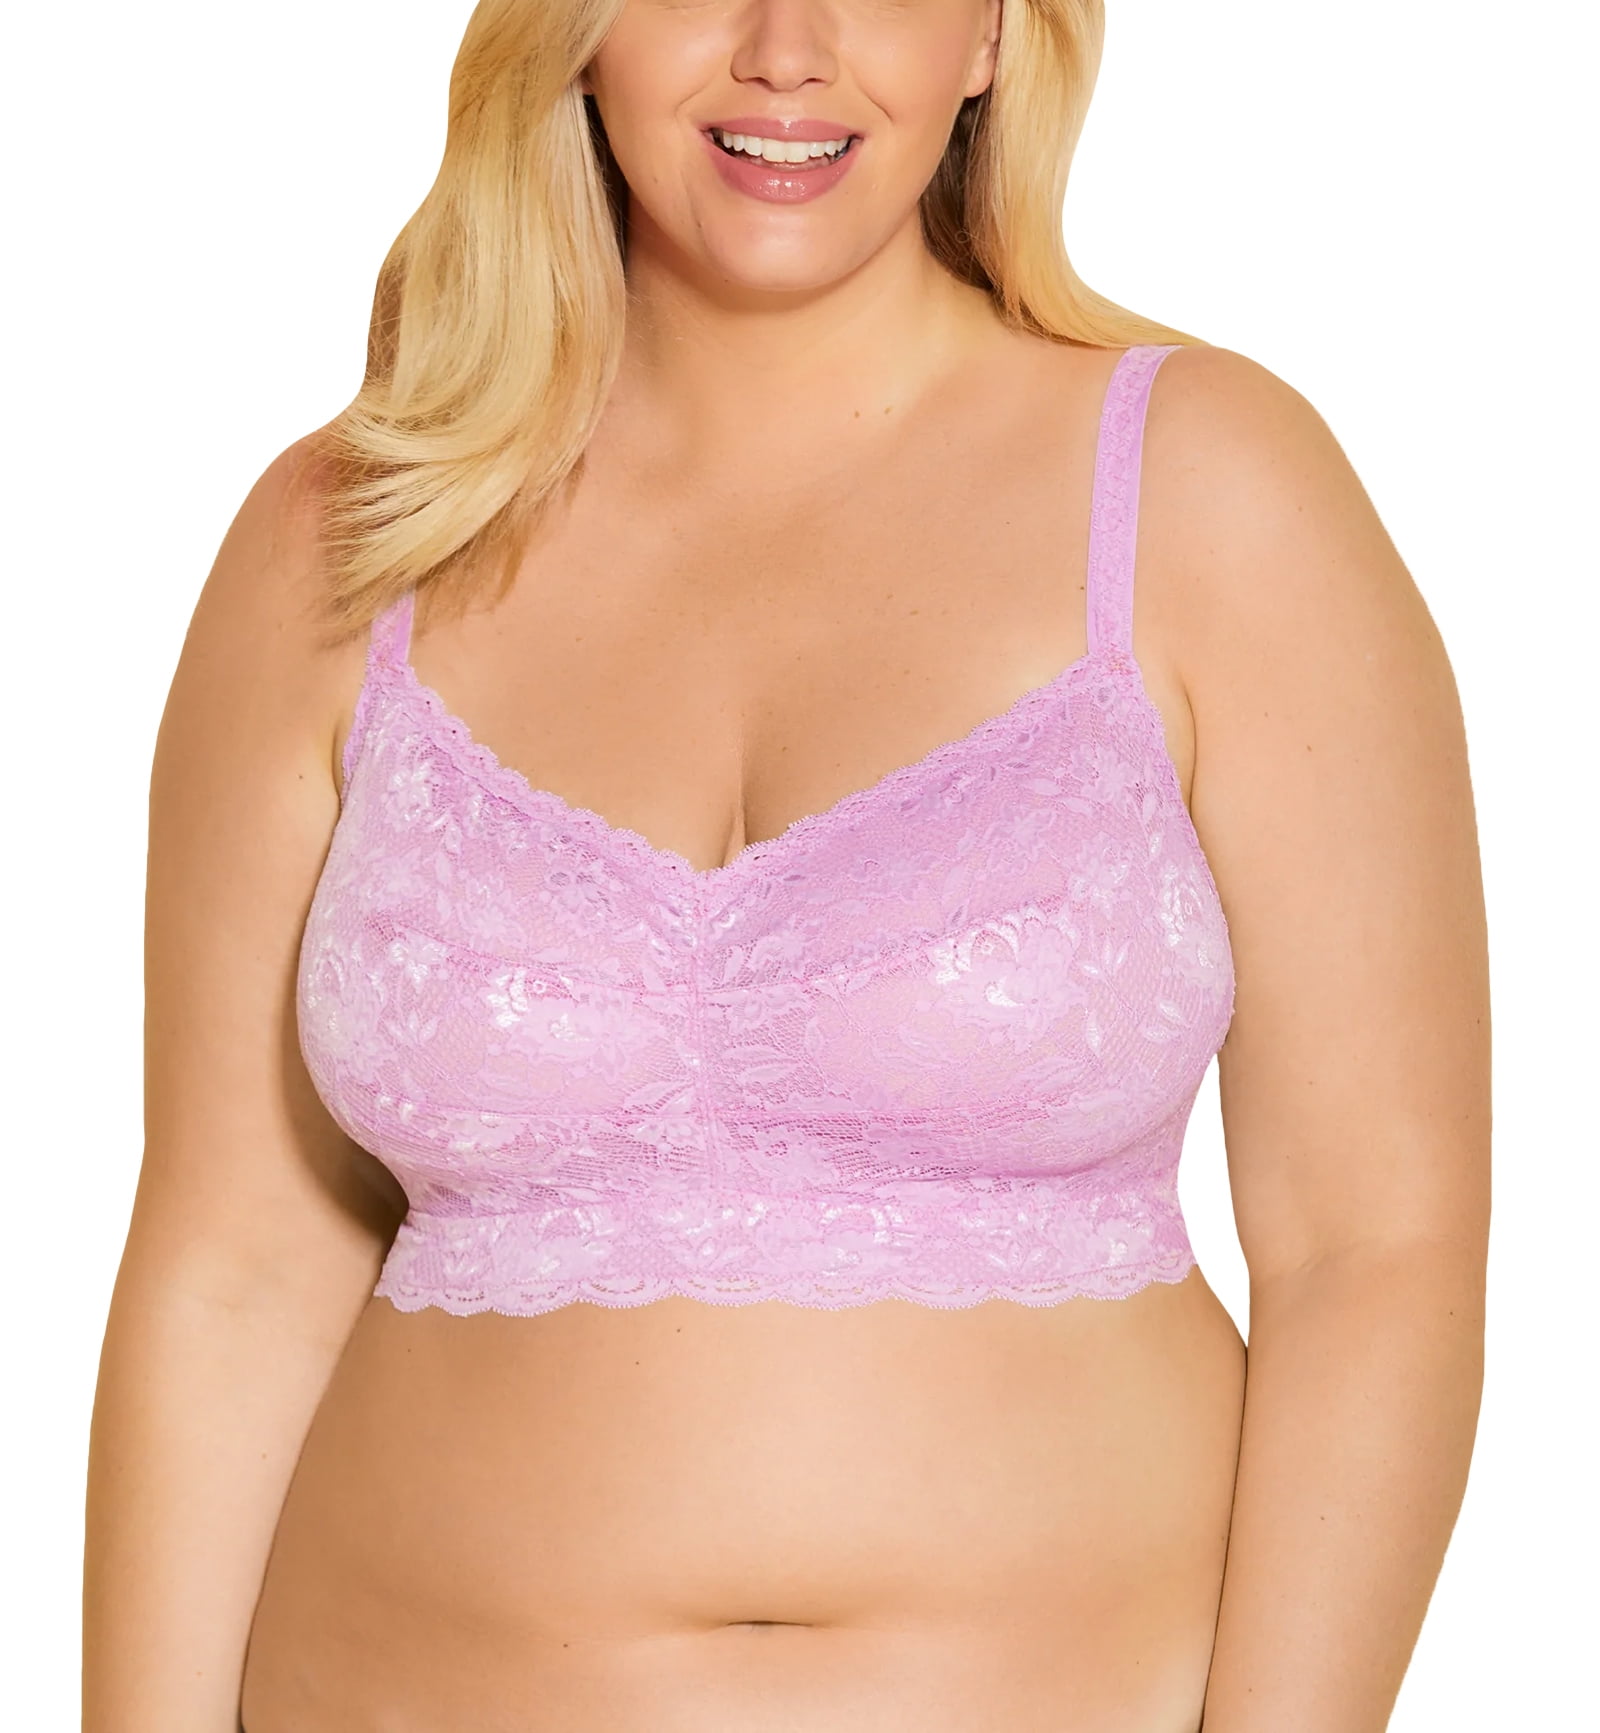 More sizes, bigger cups….the Ultra Curvy Collection arrives! - Cosabella